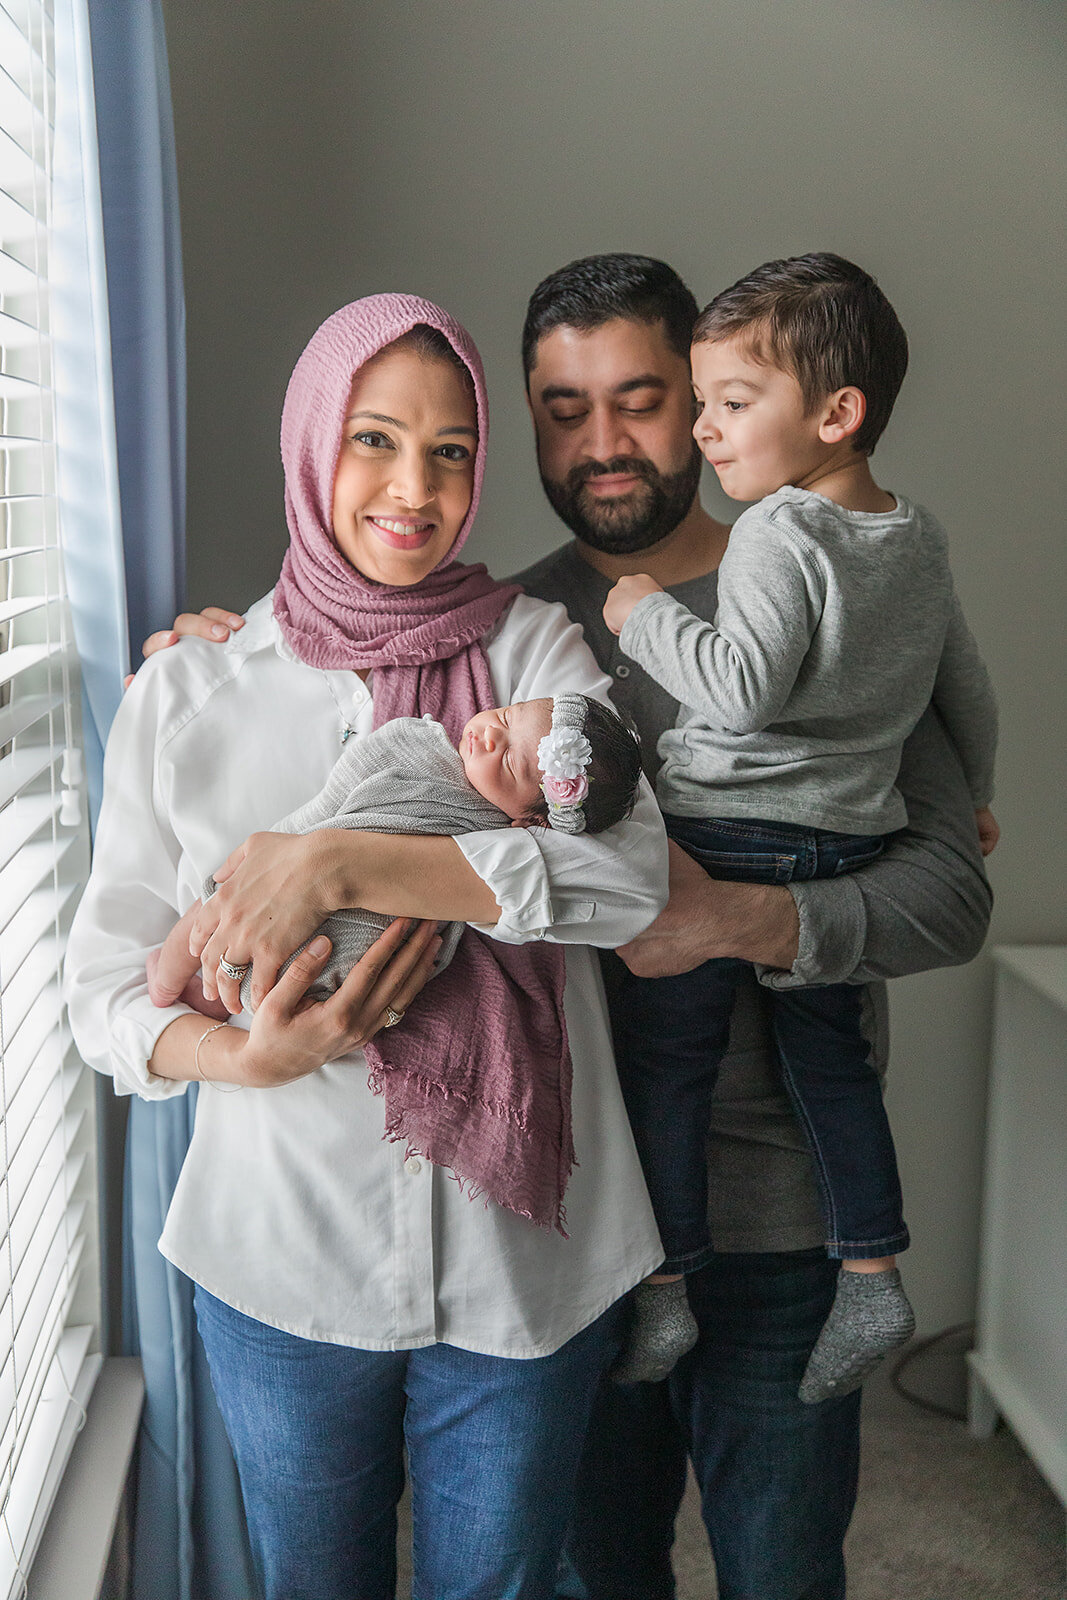 Family Poses Together with Newborn in Home Nursery